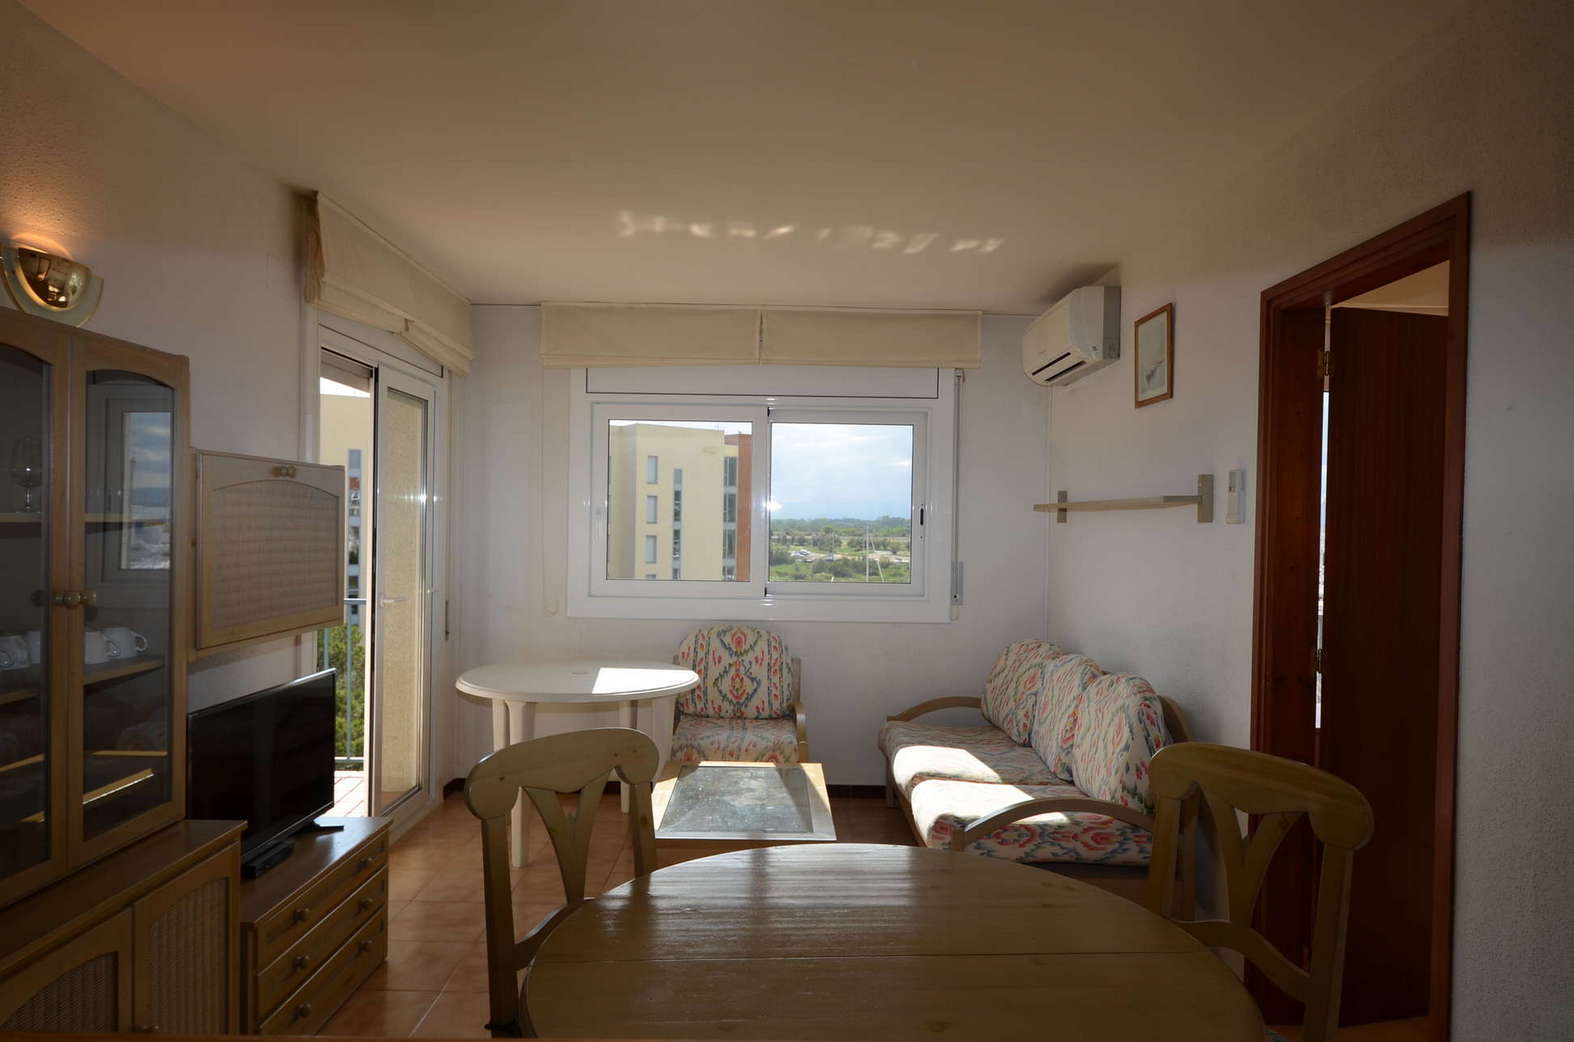 Very nice apartment with garage overlooking the canal for sale in Rosas Santa Margarita